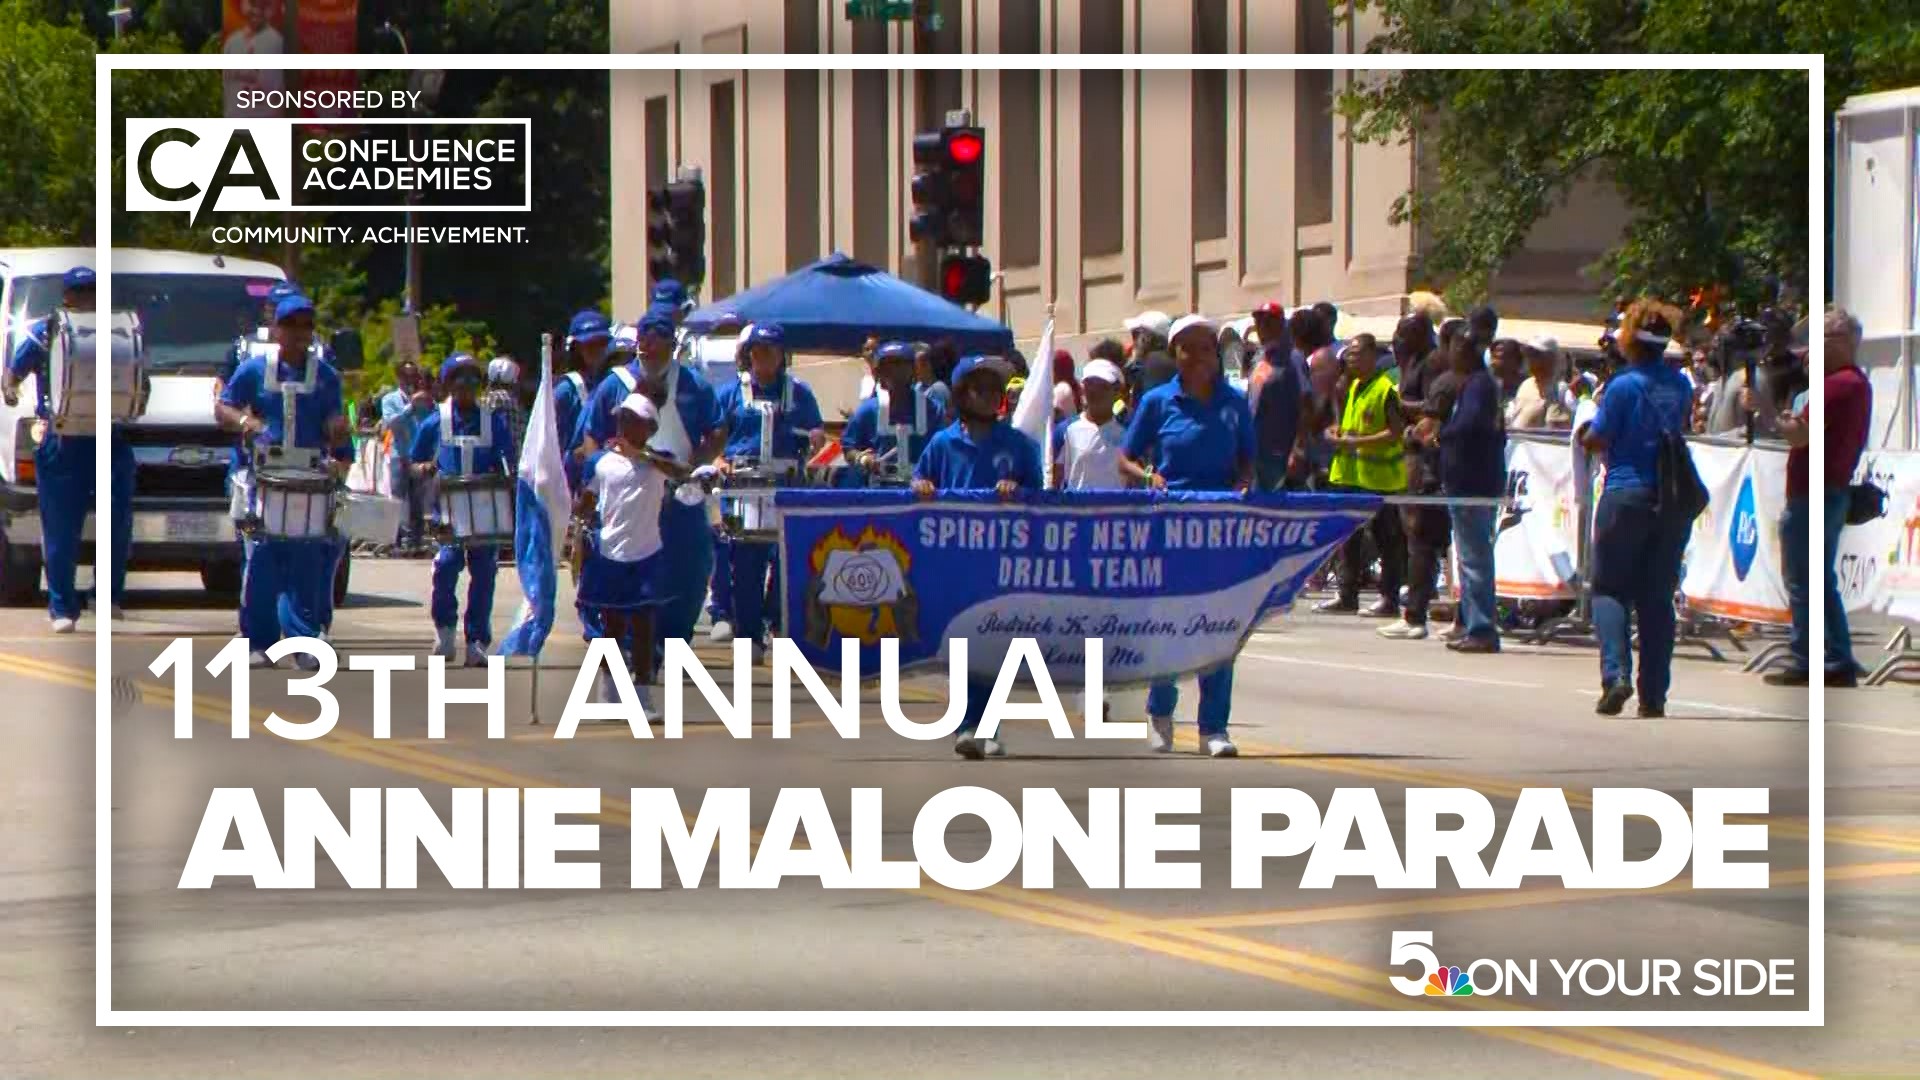 Join the sights and sounds of the 113th Annie Malone May Day Parade from downtown St. Louis. The parade is the second largest African American parade in the country.